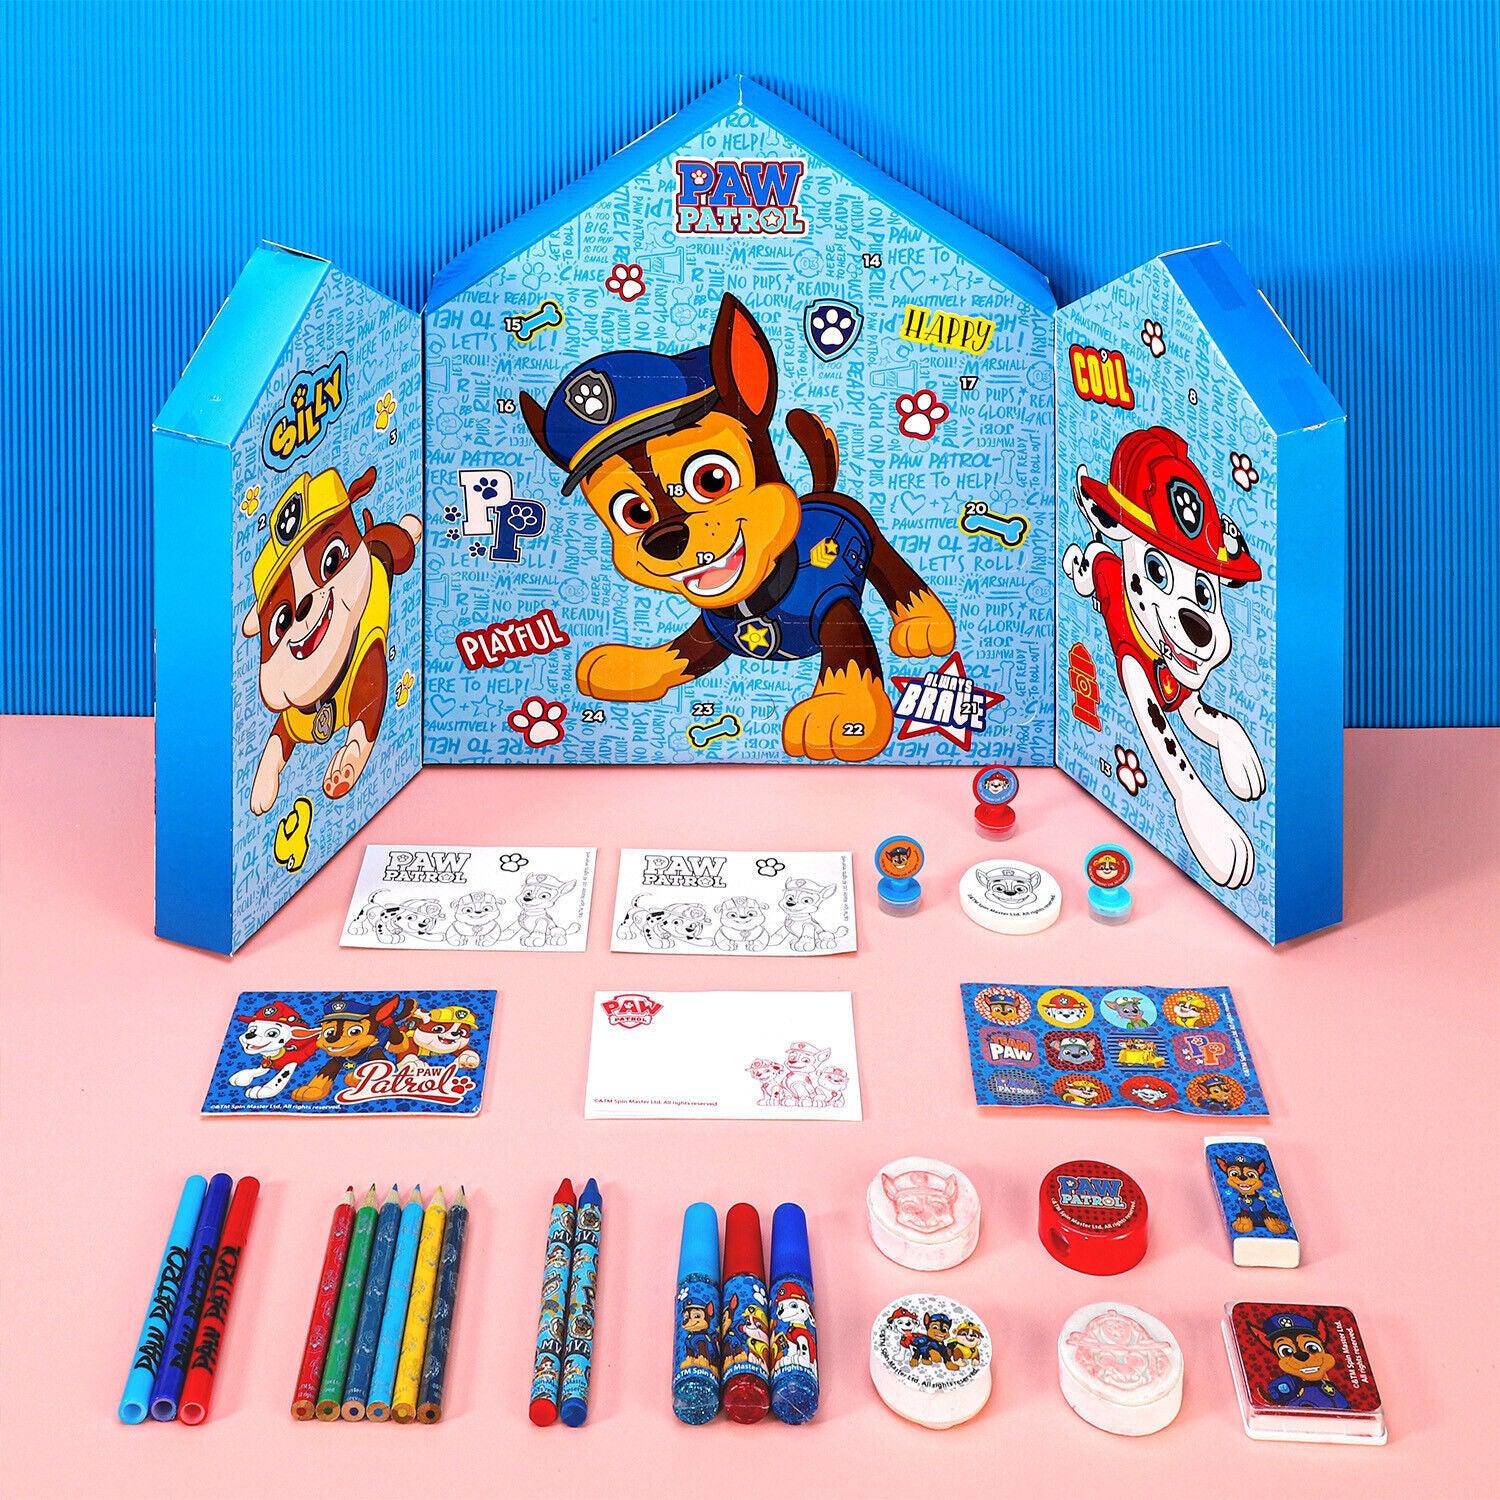 Paw Patrol Christmas Advent Calendar Art & Craft Stationery Set - Home Inspired Gifts